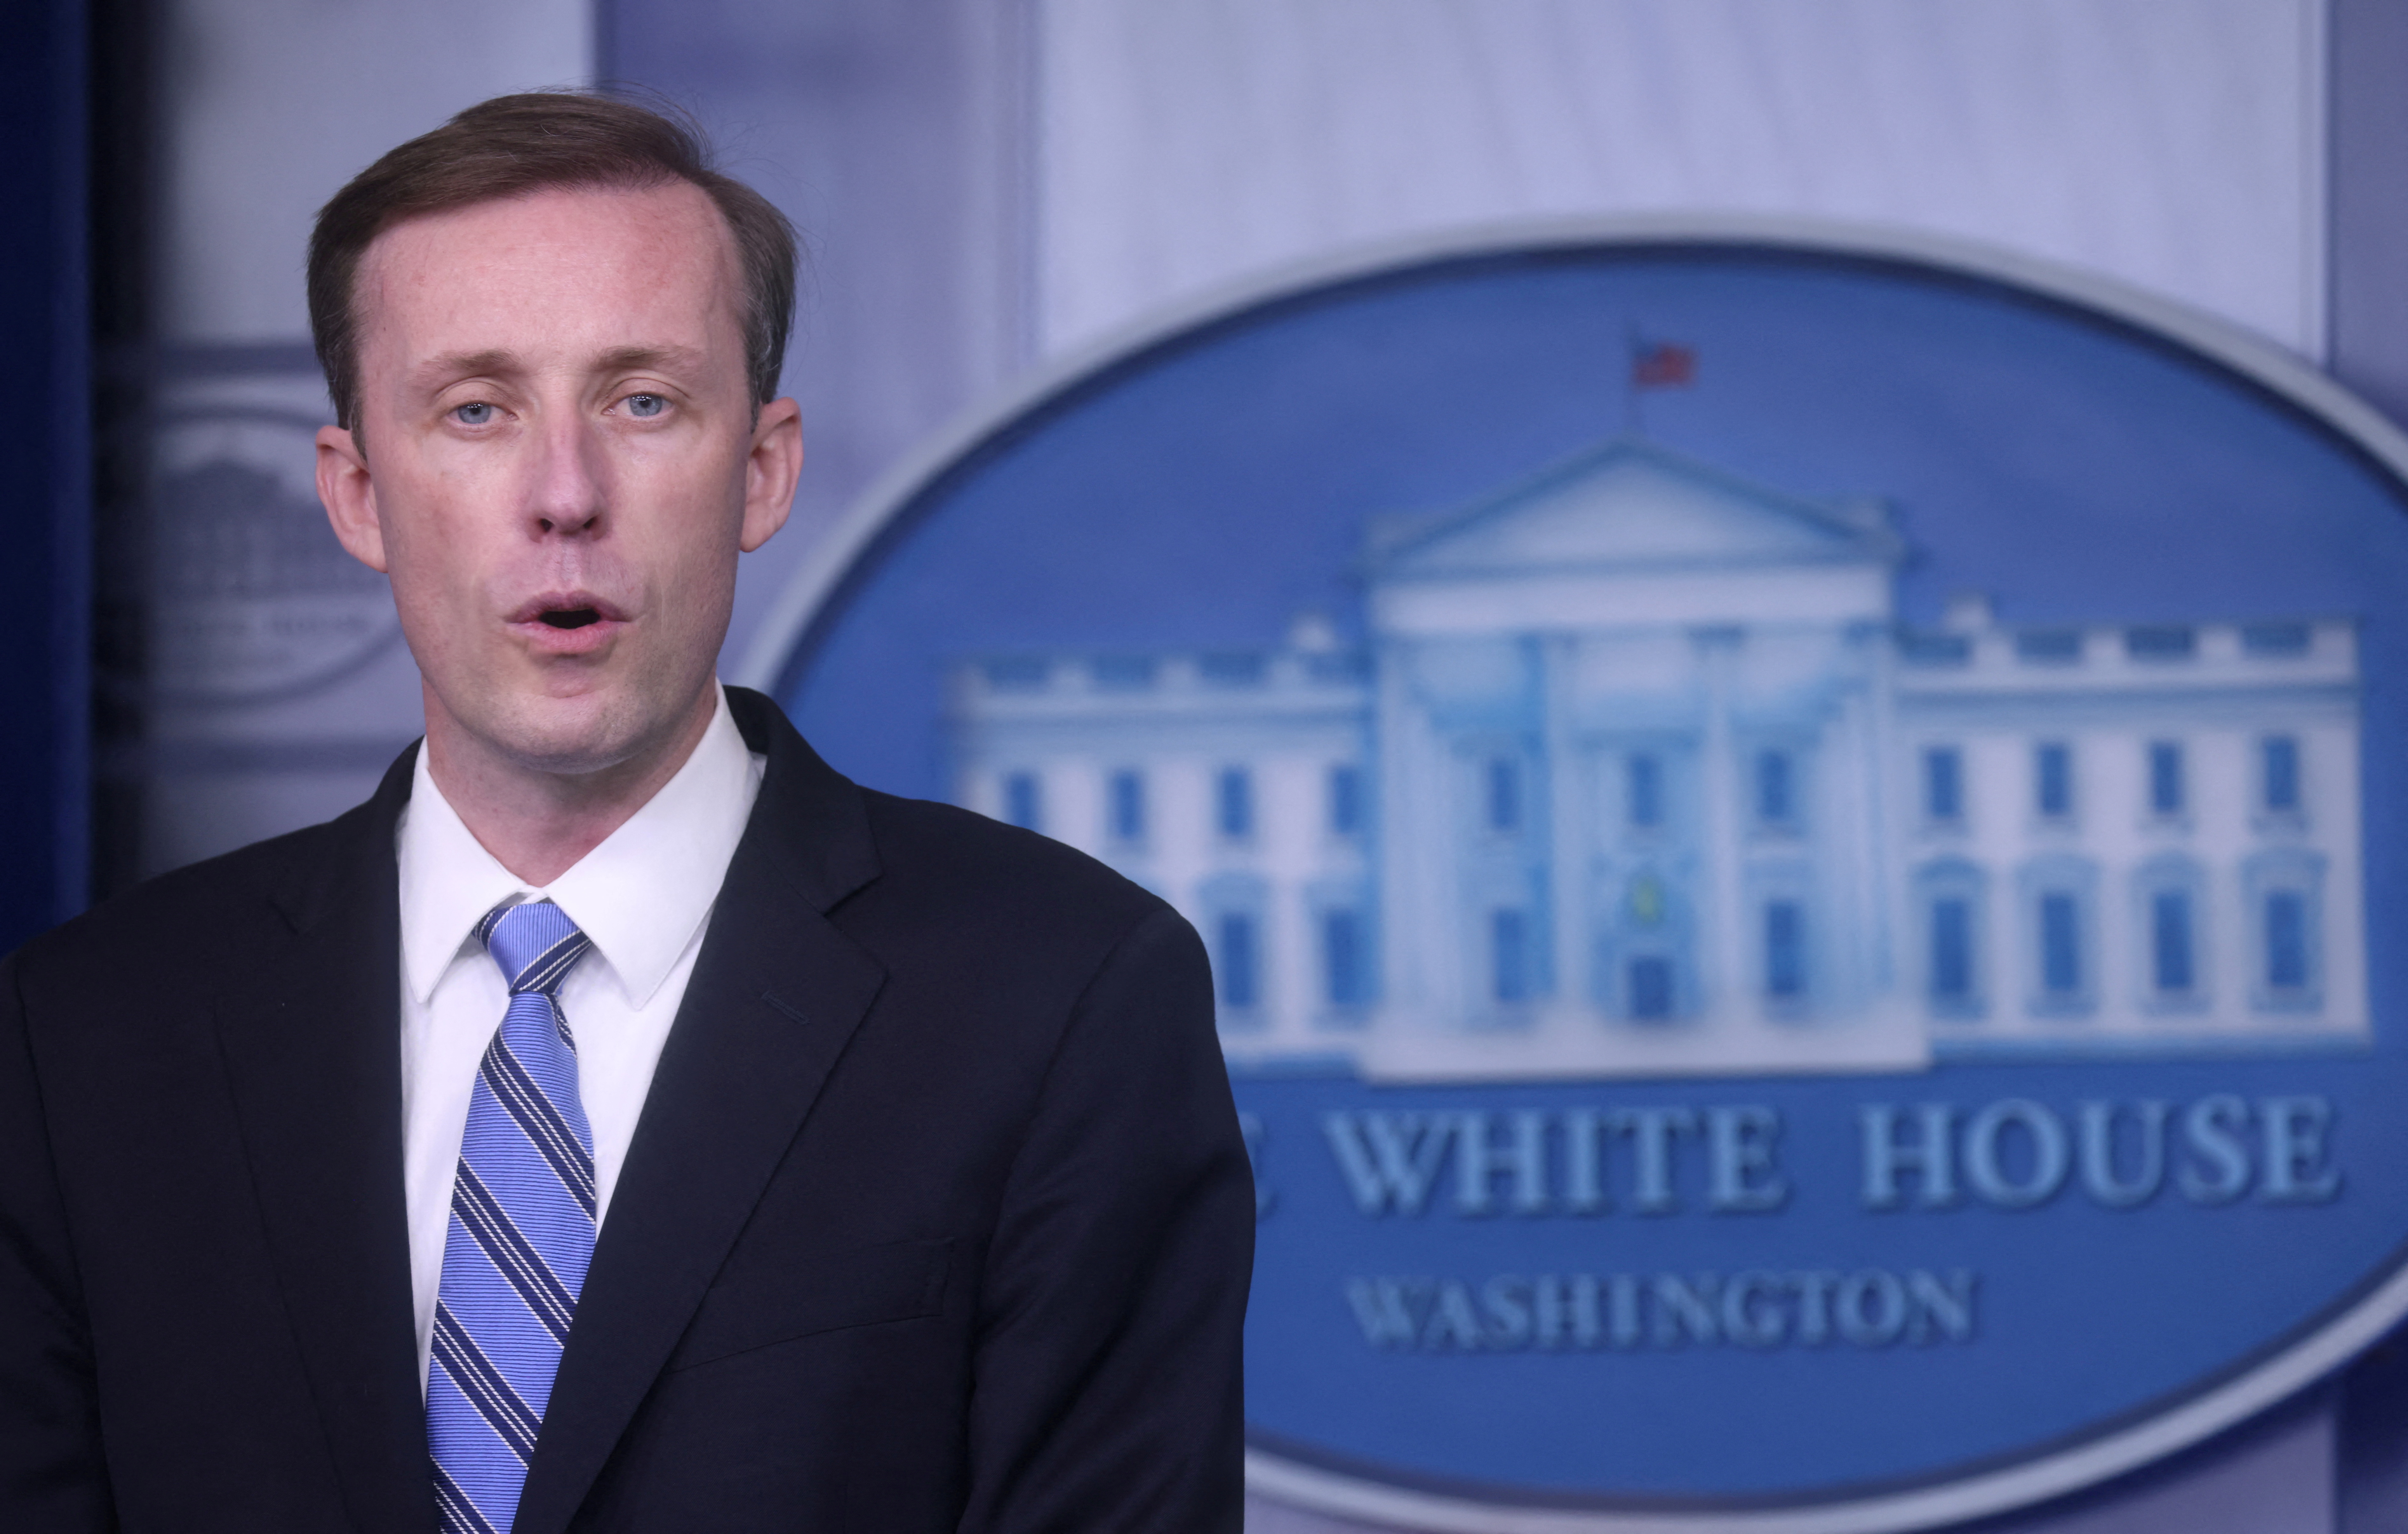 U.S. national security adviser Jake Sullivan speaks during a news briefing at the White House